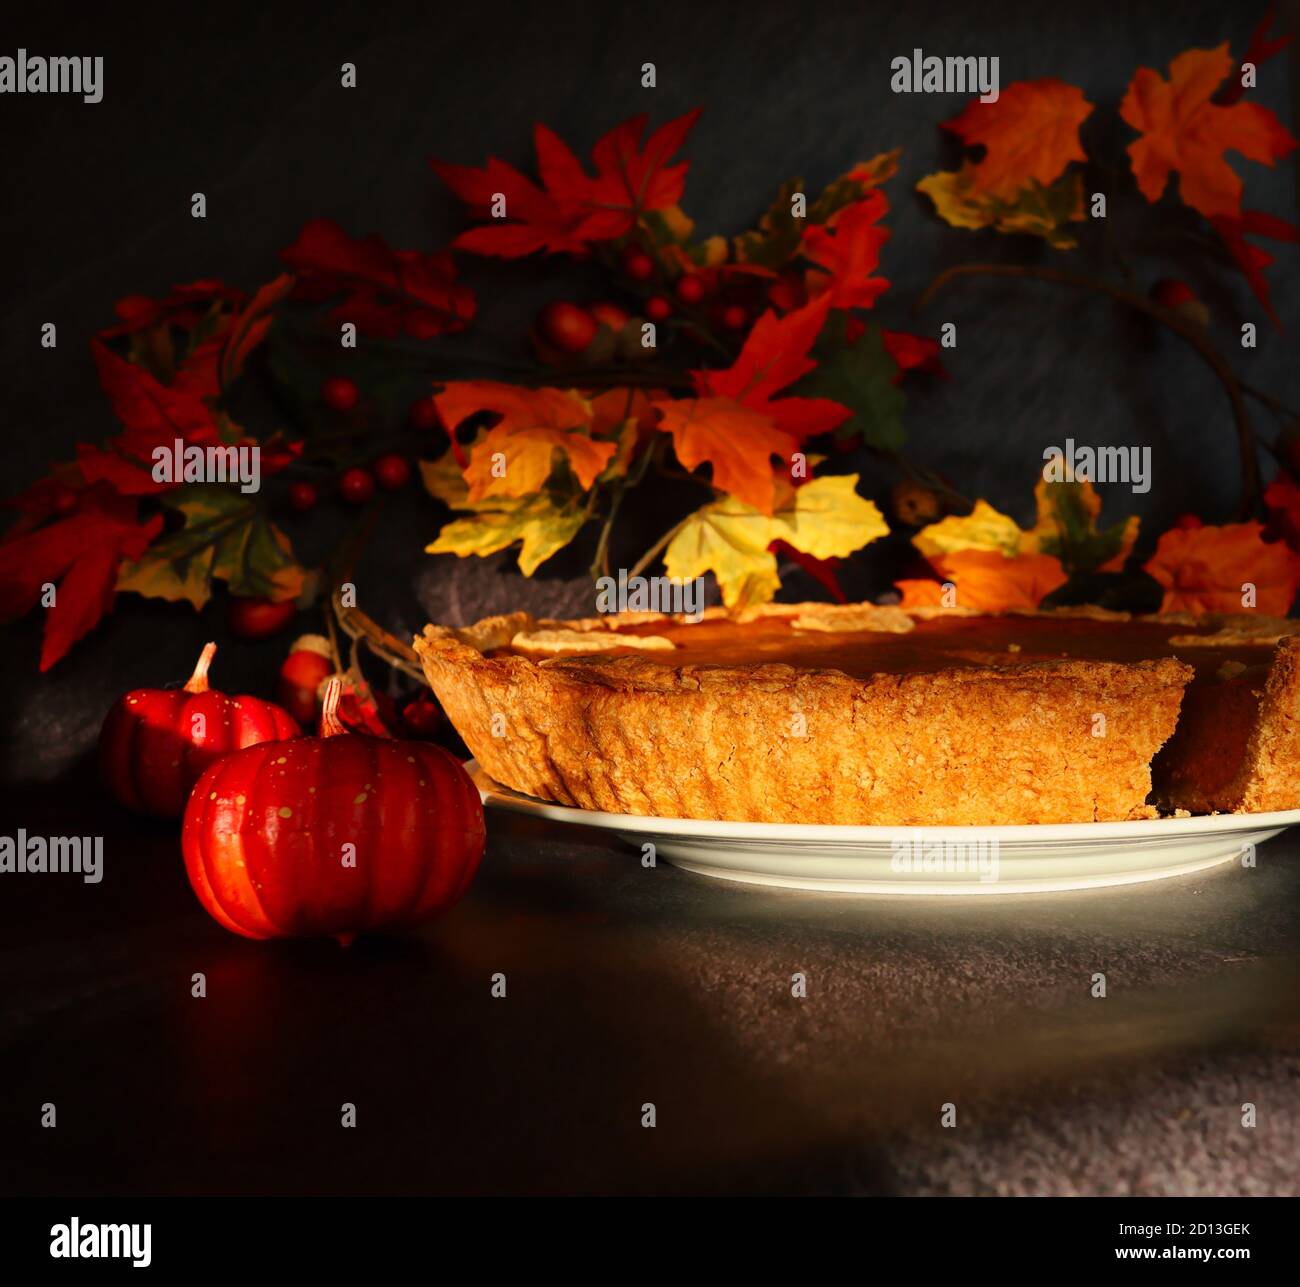 Closeup of Pumpkin Pie Crust on White Plate shot during Sunny Day. Baked Autumn Food with Small Artificial Decorative Pumpkin. Stock Photo